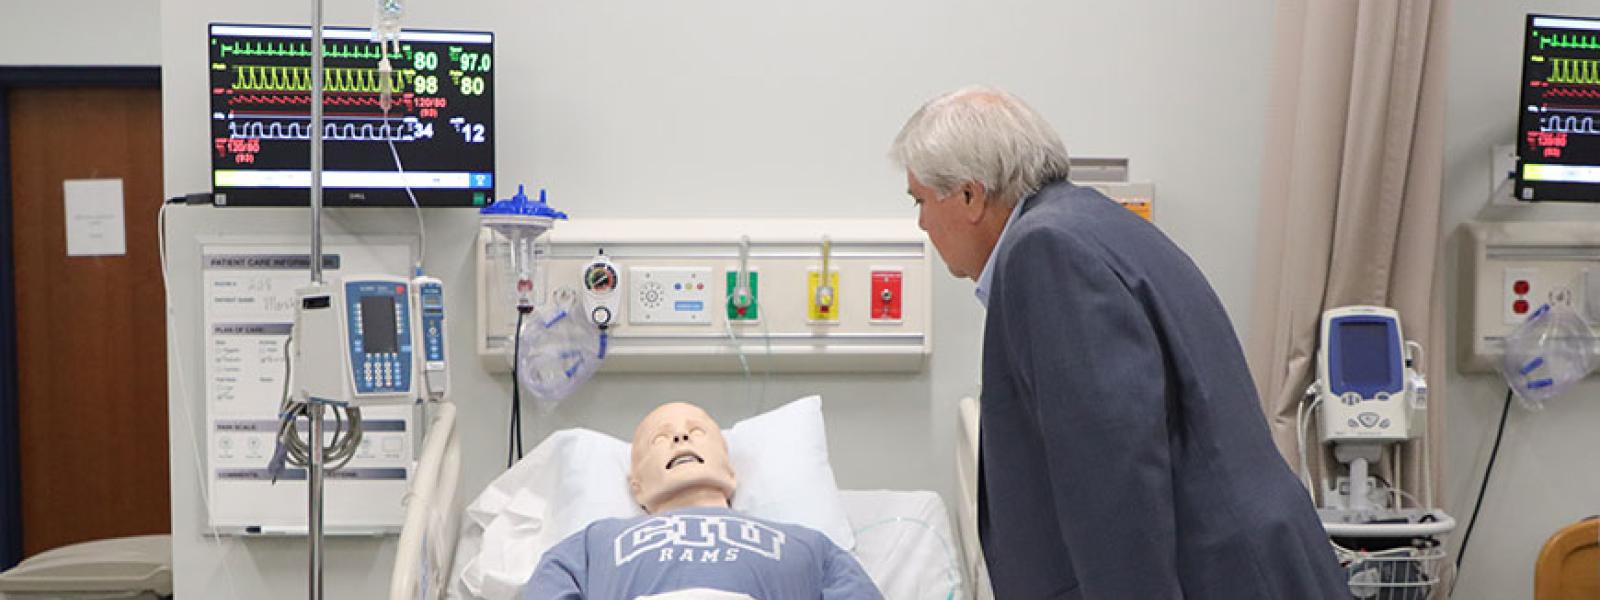 A "patient" gets a visitor in the Simulation Room. (Photos by Kierston Smith)